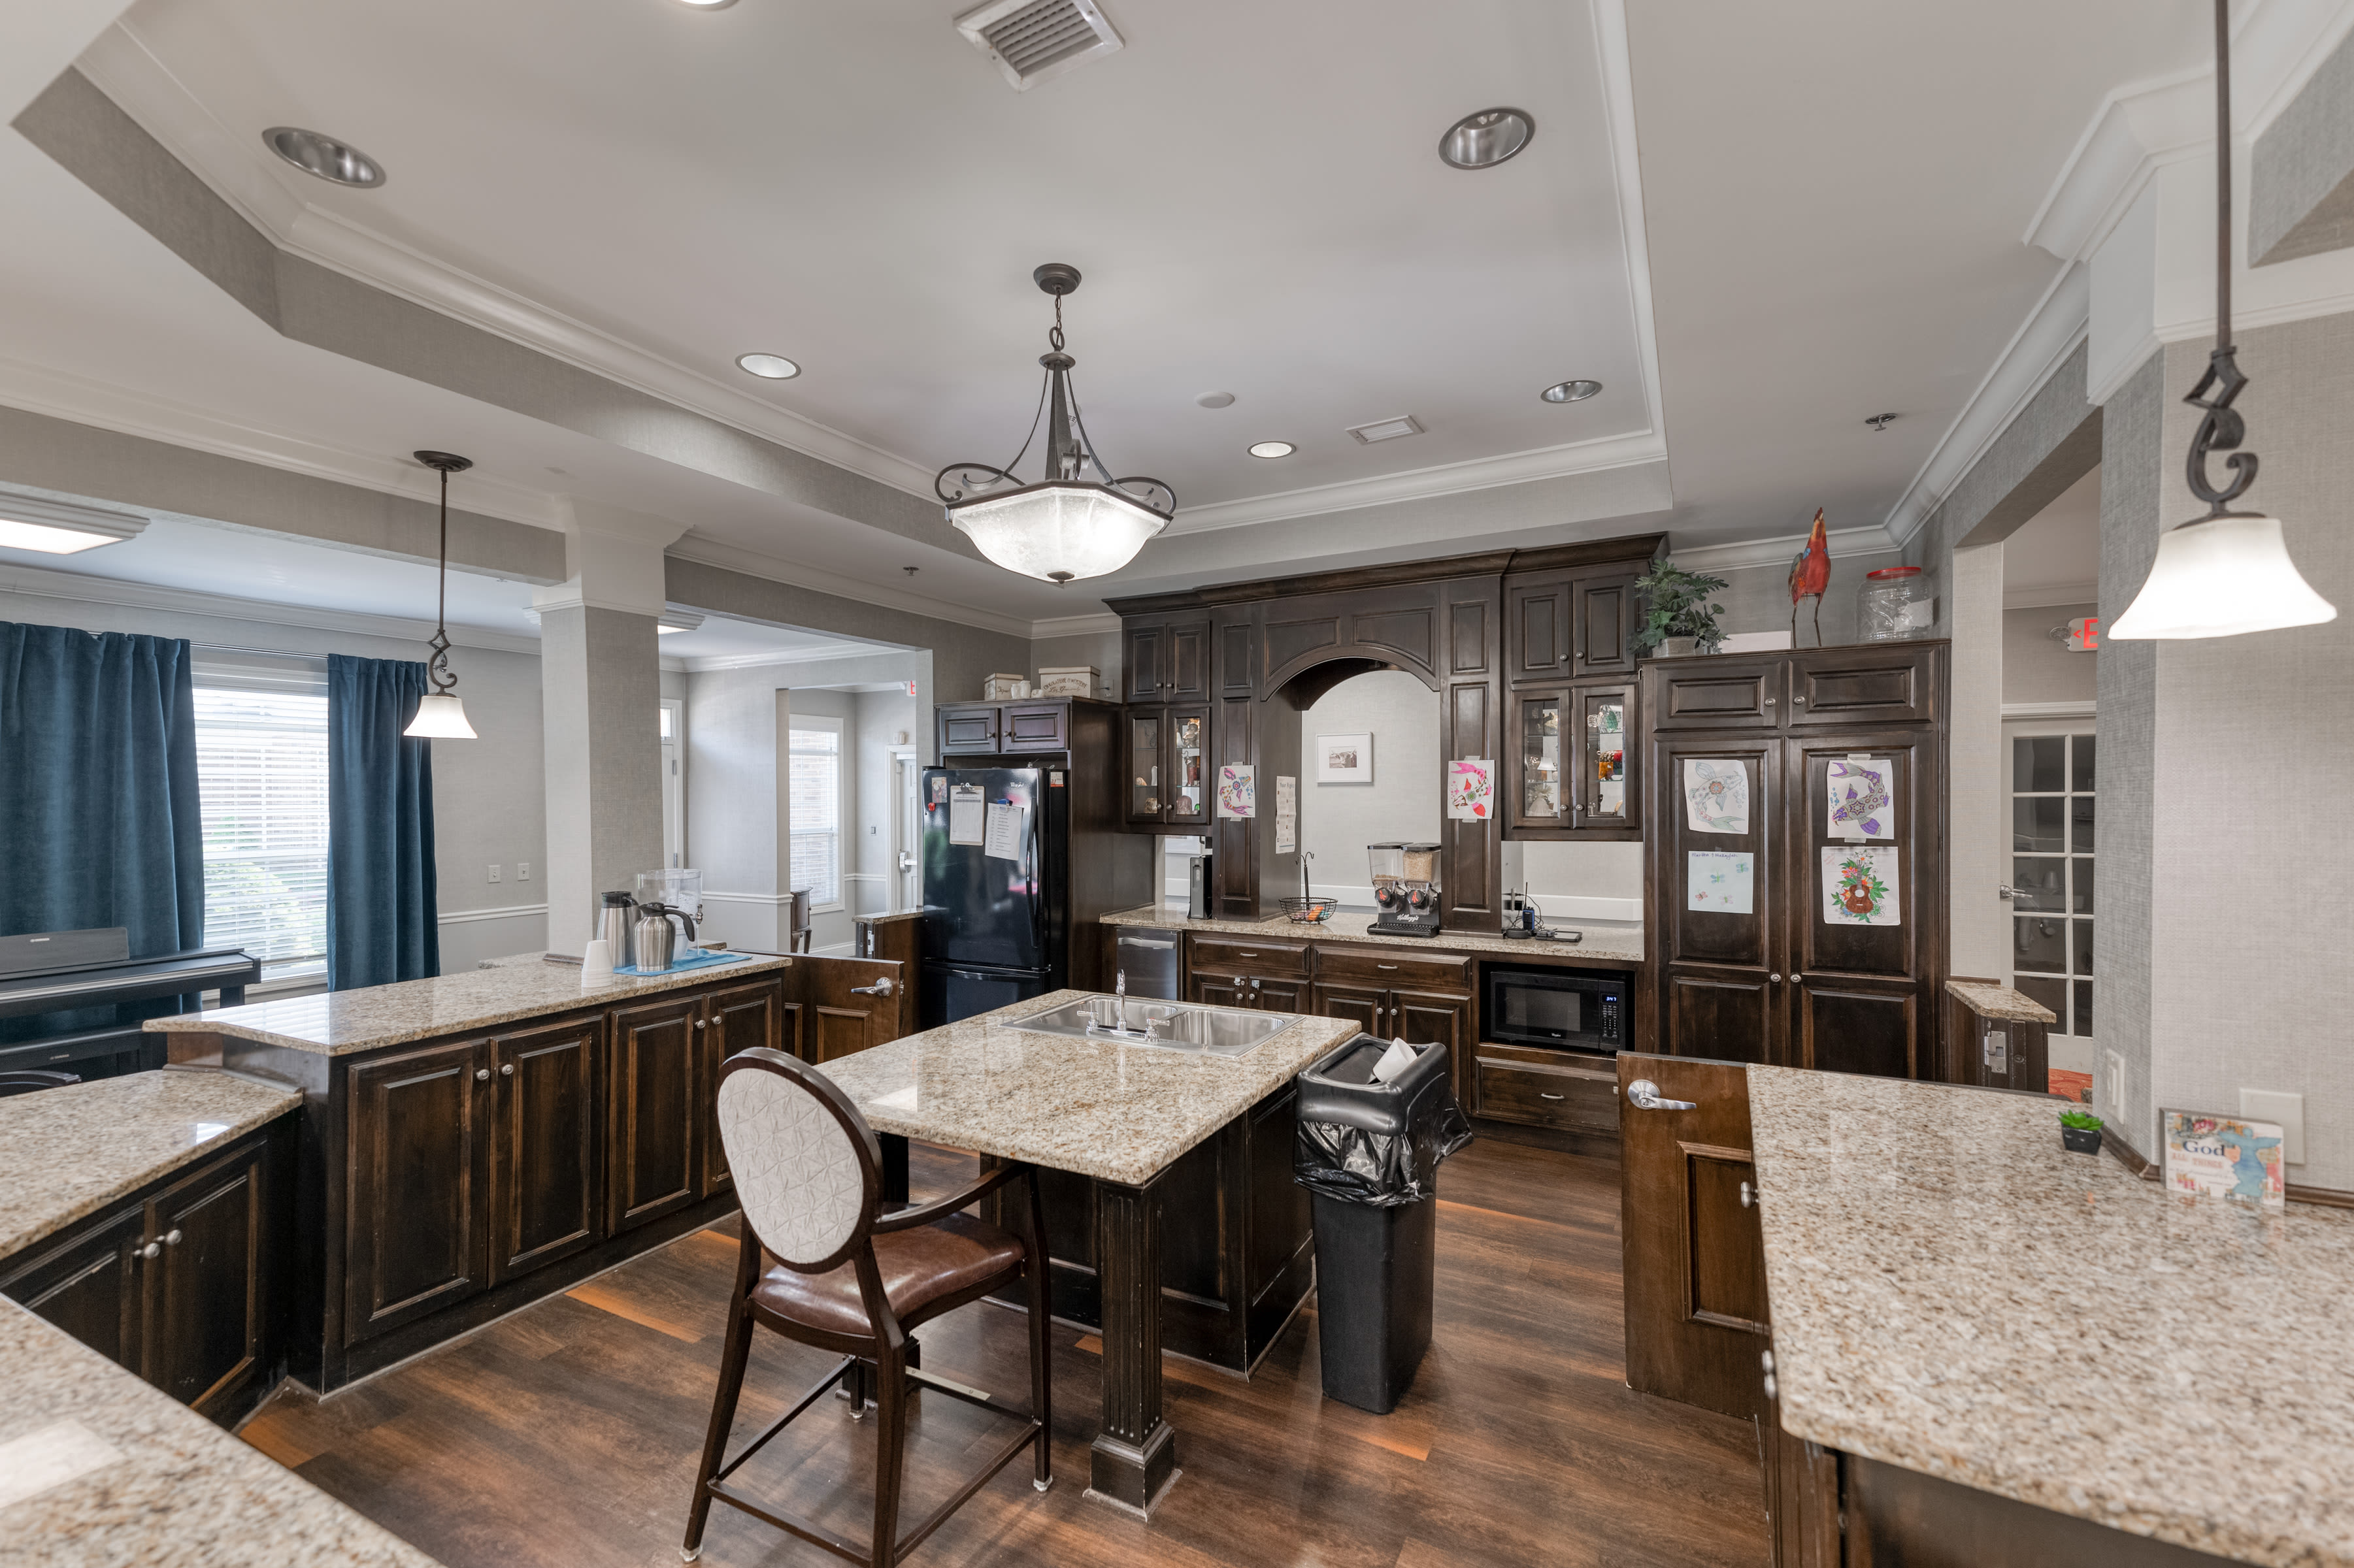 Kitchen and dining area at Addington Place of Shoal Creek in Kansas City, Missouri. 